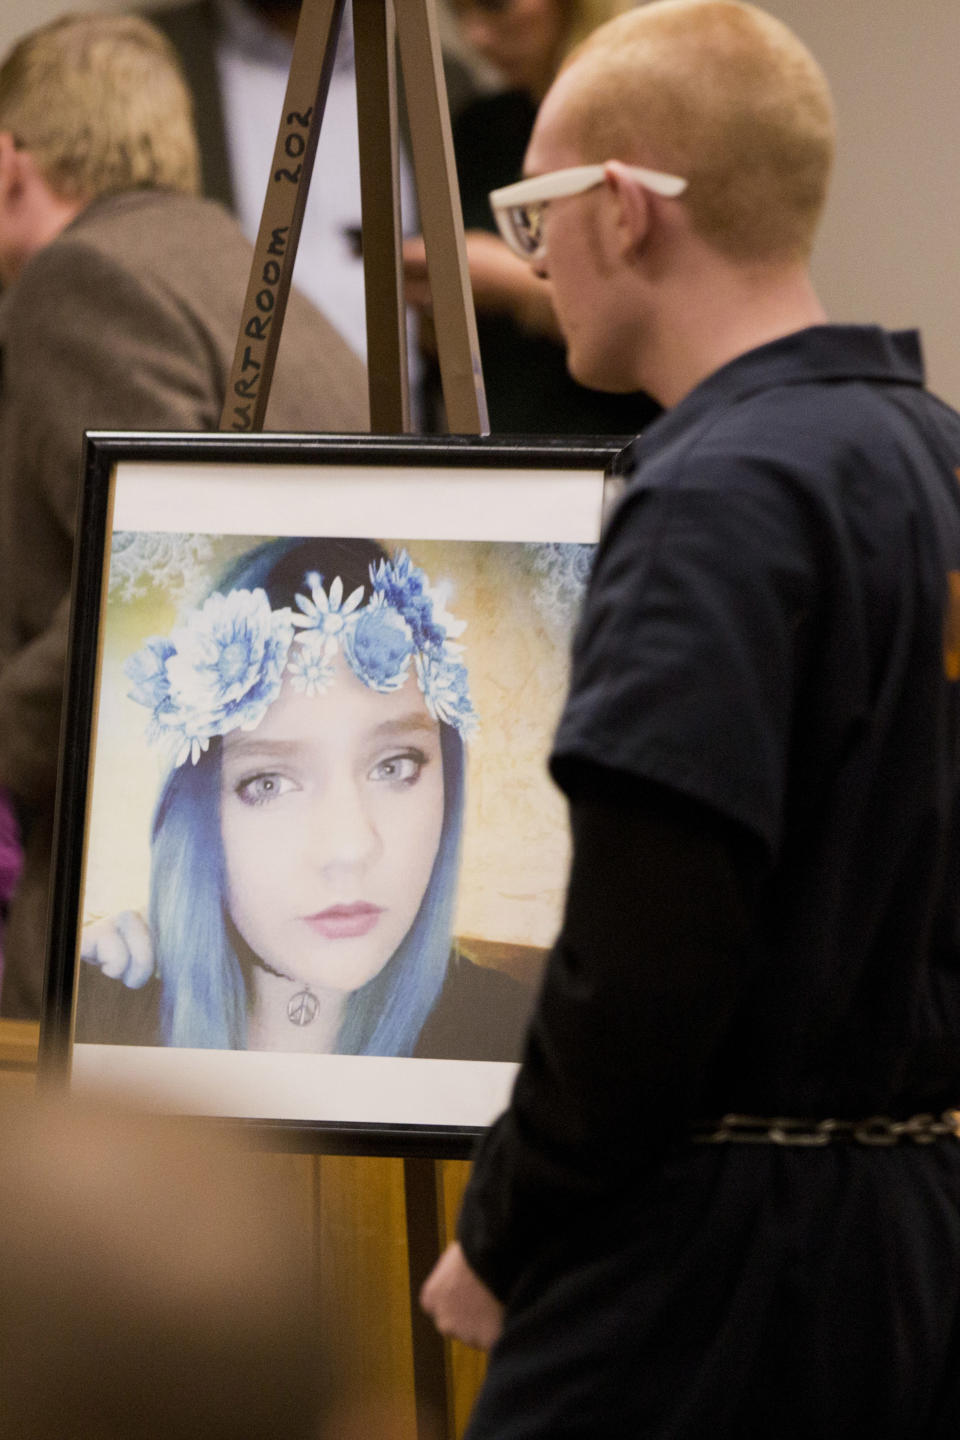 Tyerell Joe Przybycien walks by a photo of Jchandra Brown in the 4th District Court during his sentencing on Dec. 7, 2018, in Provo, Utah.&nbsp; (Photo: ASSOCIATED PRESS)